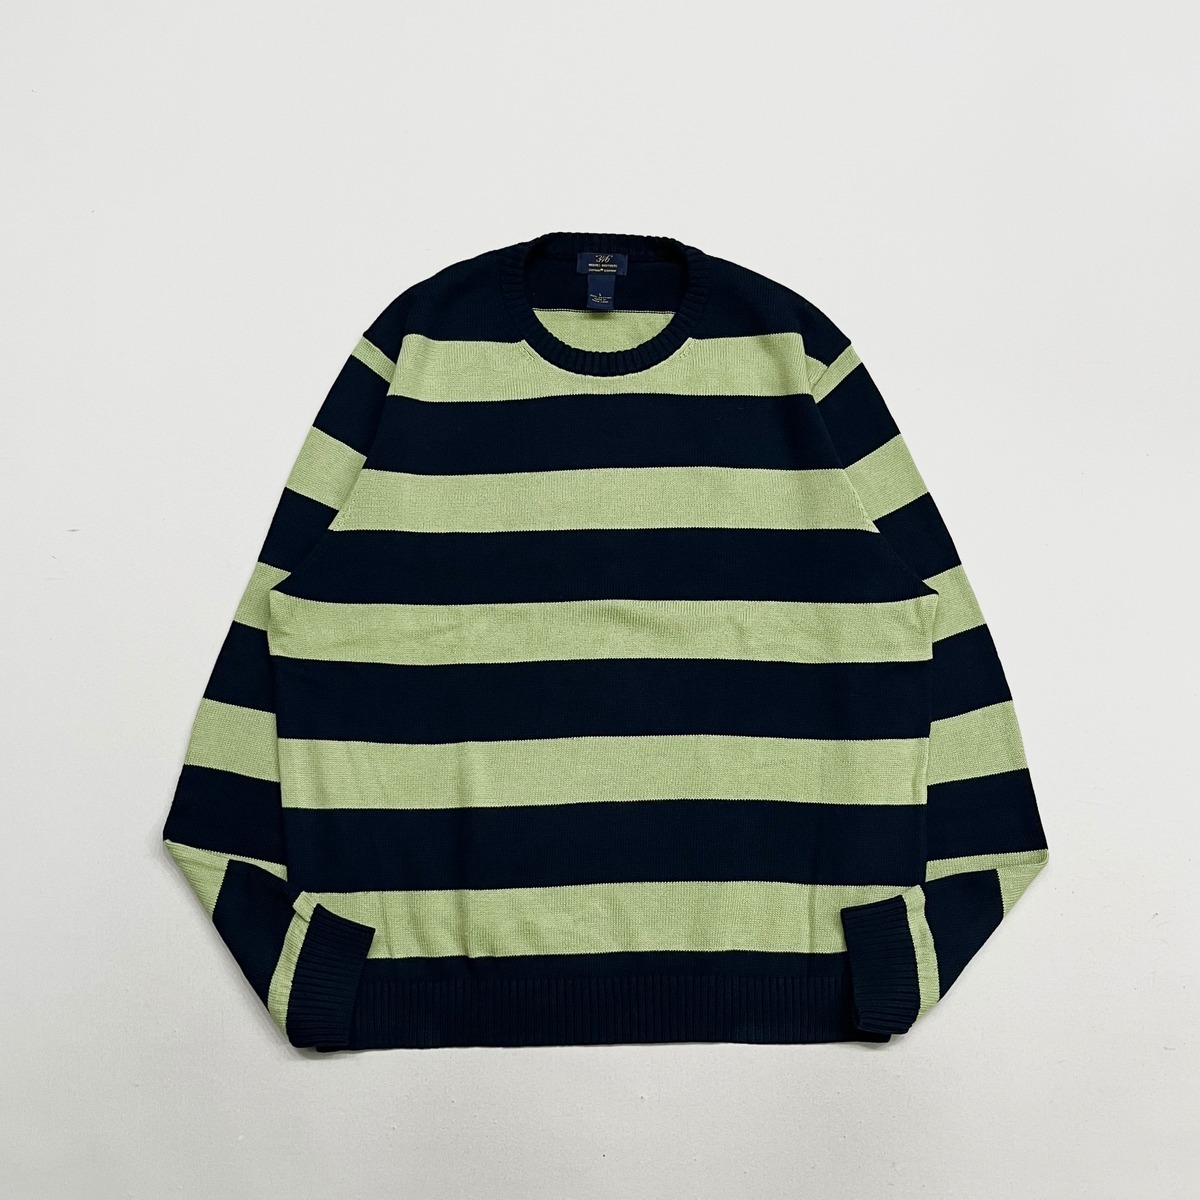 Brooks Brothers cotton sweater | High On Life used clothing